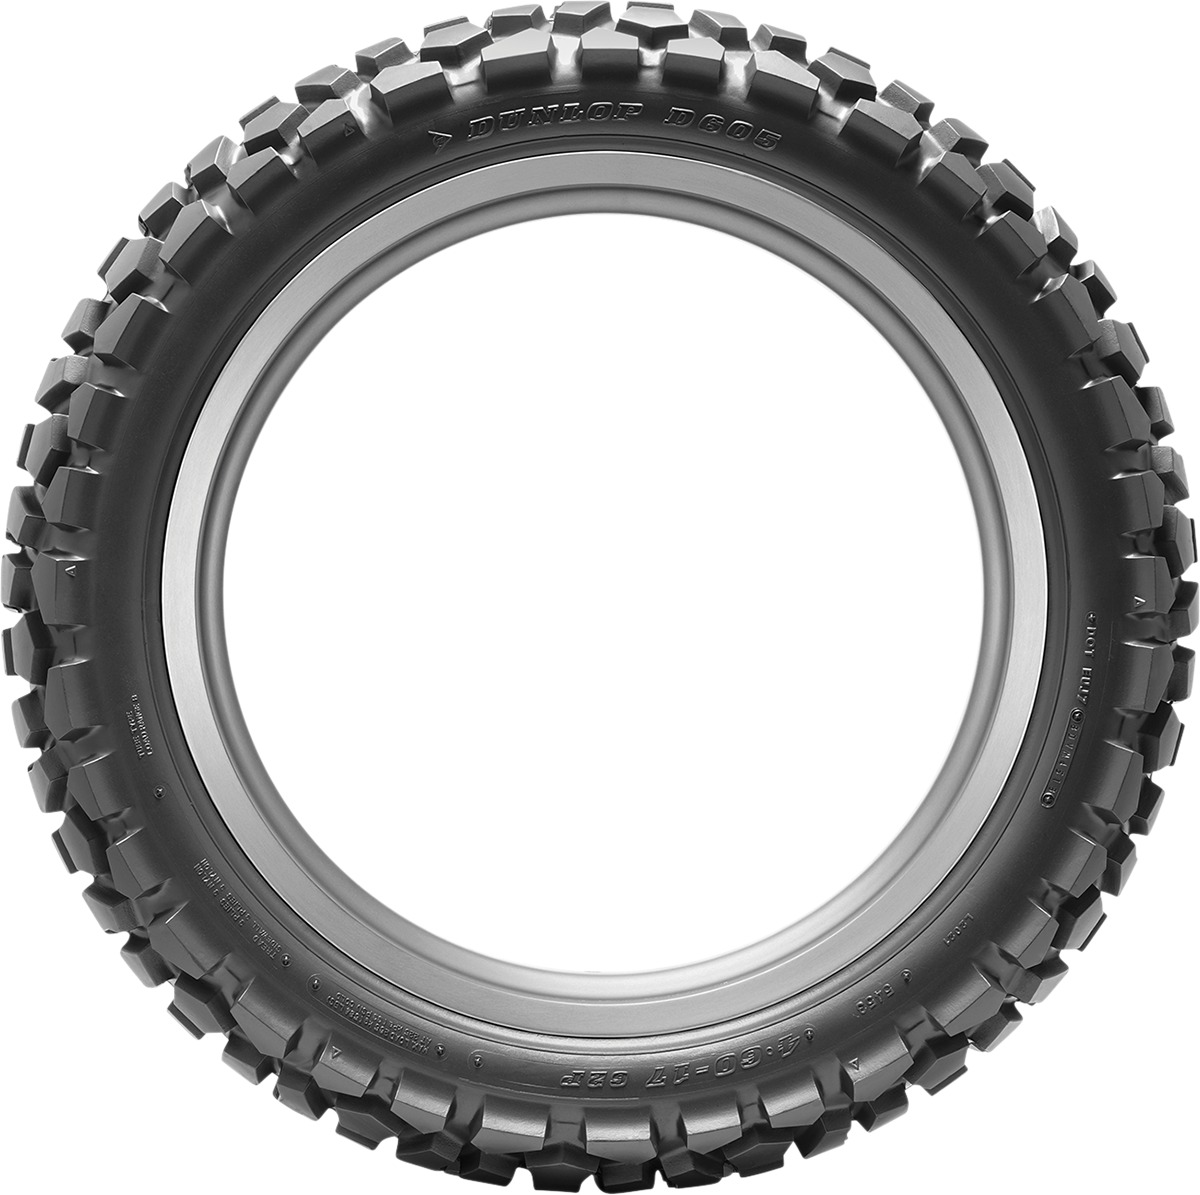 D605 Bias Rear Tire 4.10-18 Tube Type - Click Image to Close